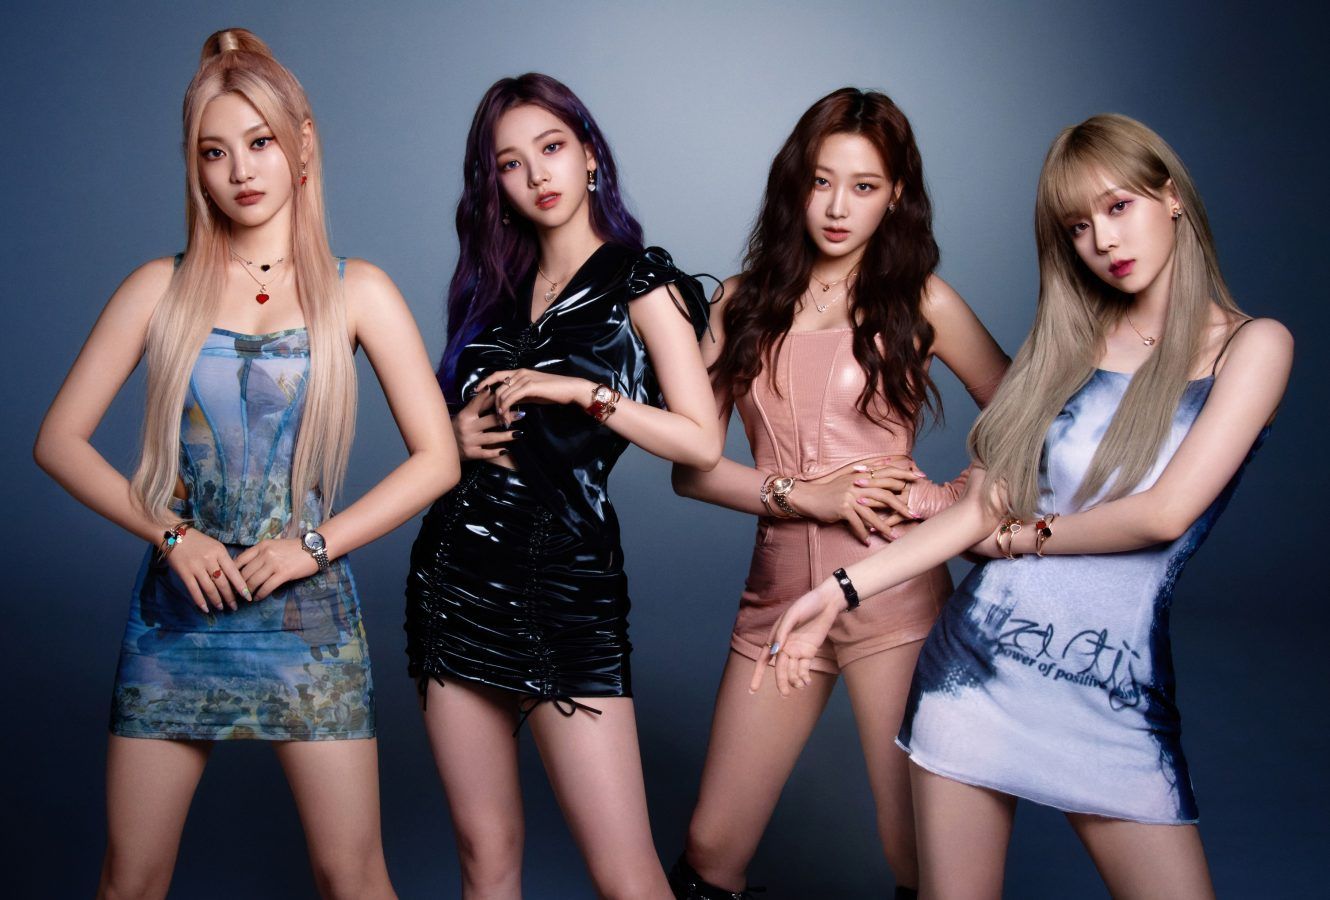 South Korean Girl Group Aespa Fronts The Chopards Latest Campaign